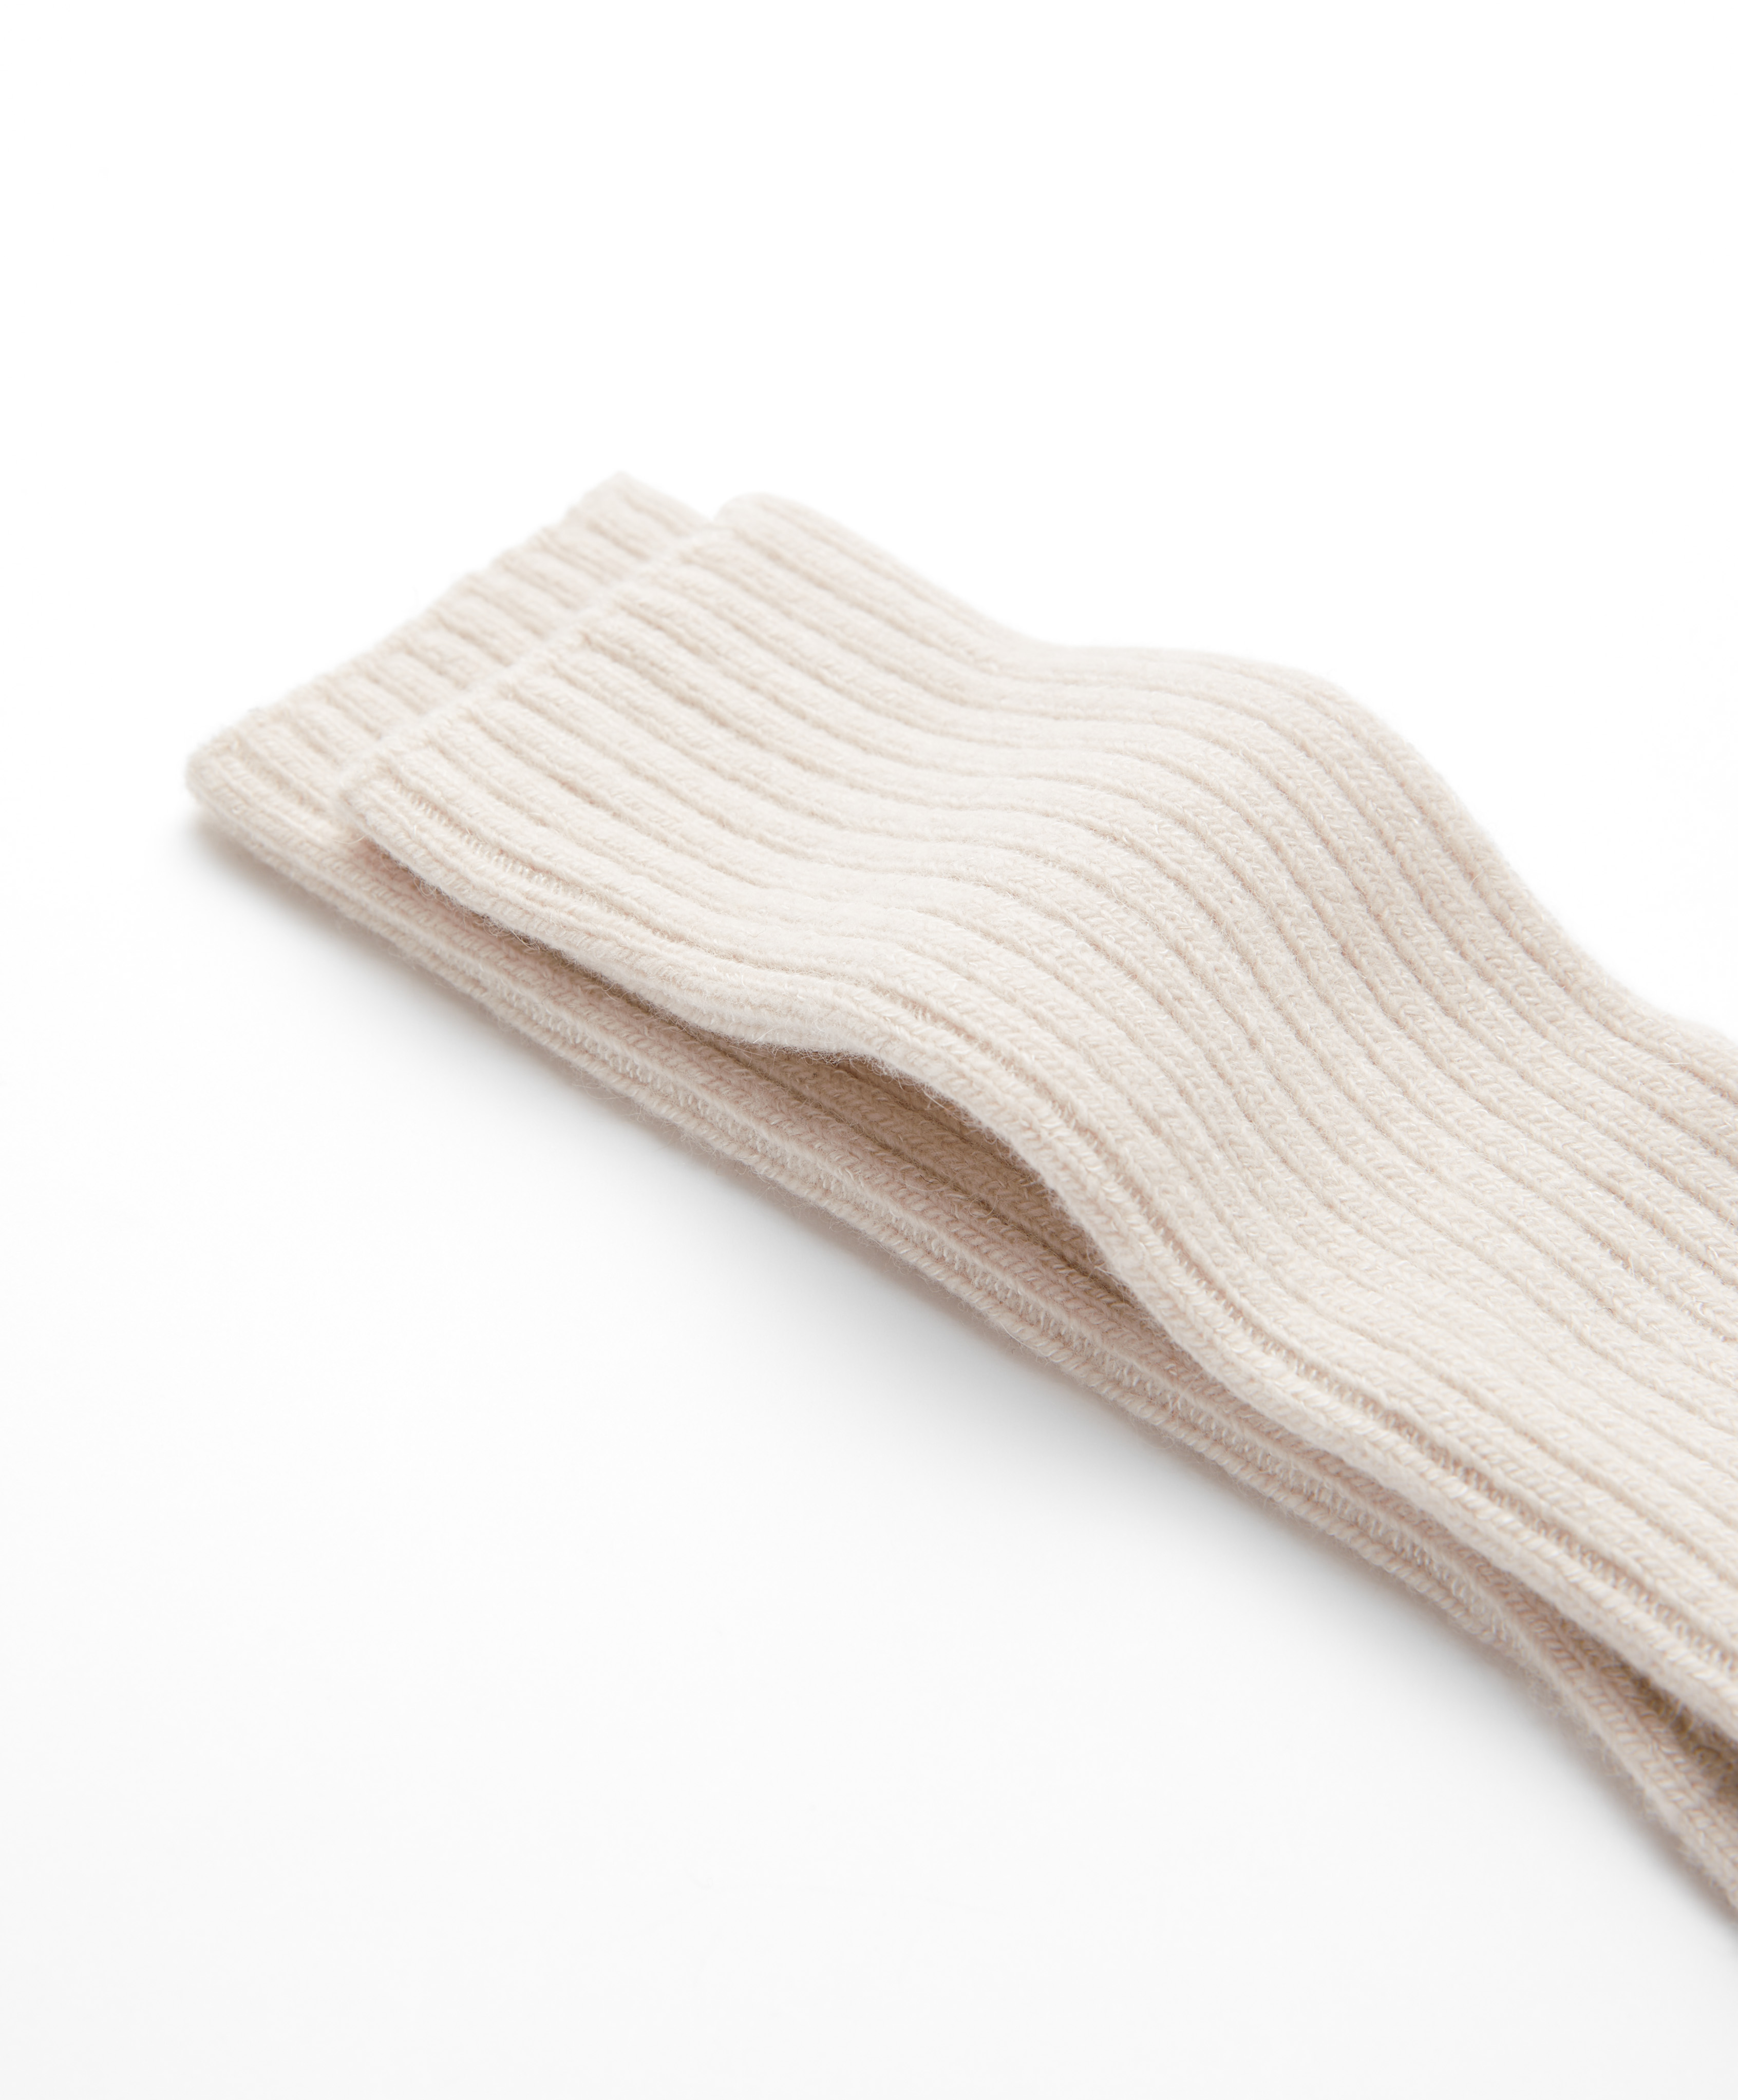 Ribbed wool and cashmere classic socks